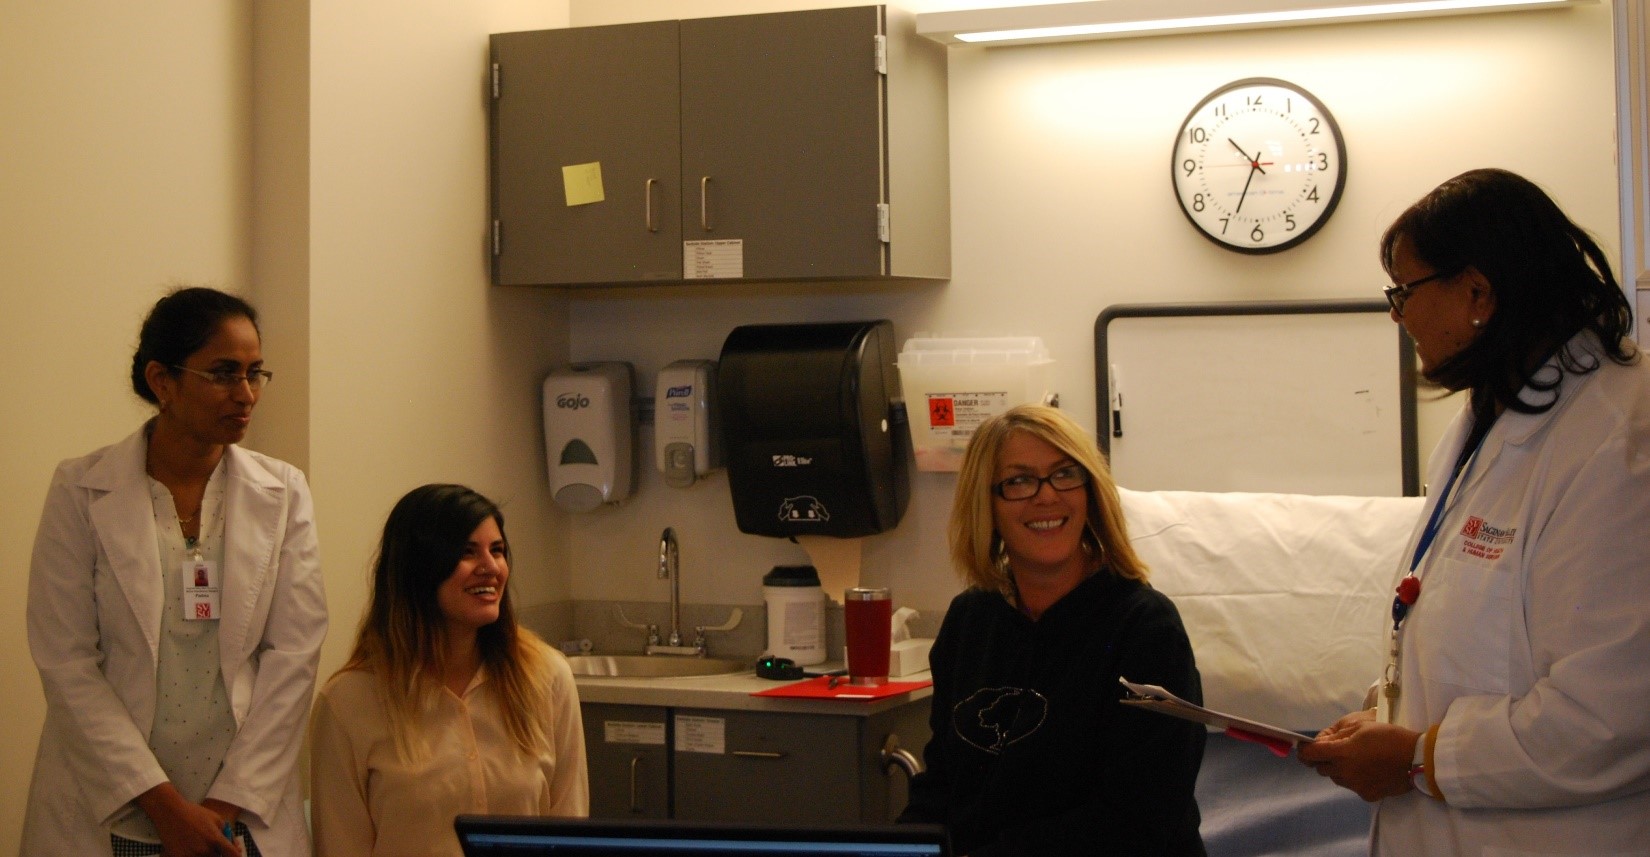 Behavioral health simulation with two students, standardized patient and faculty